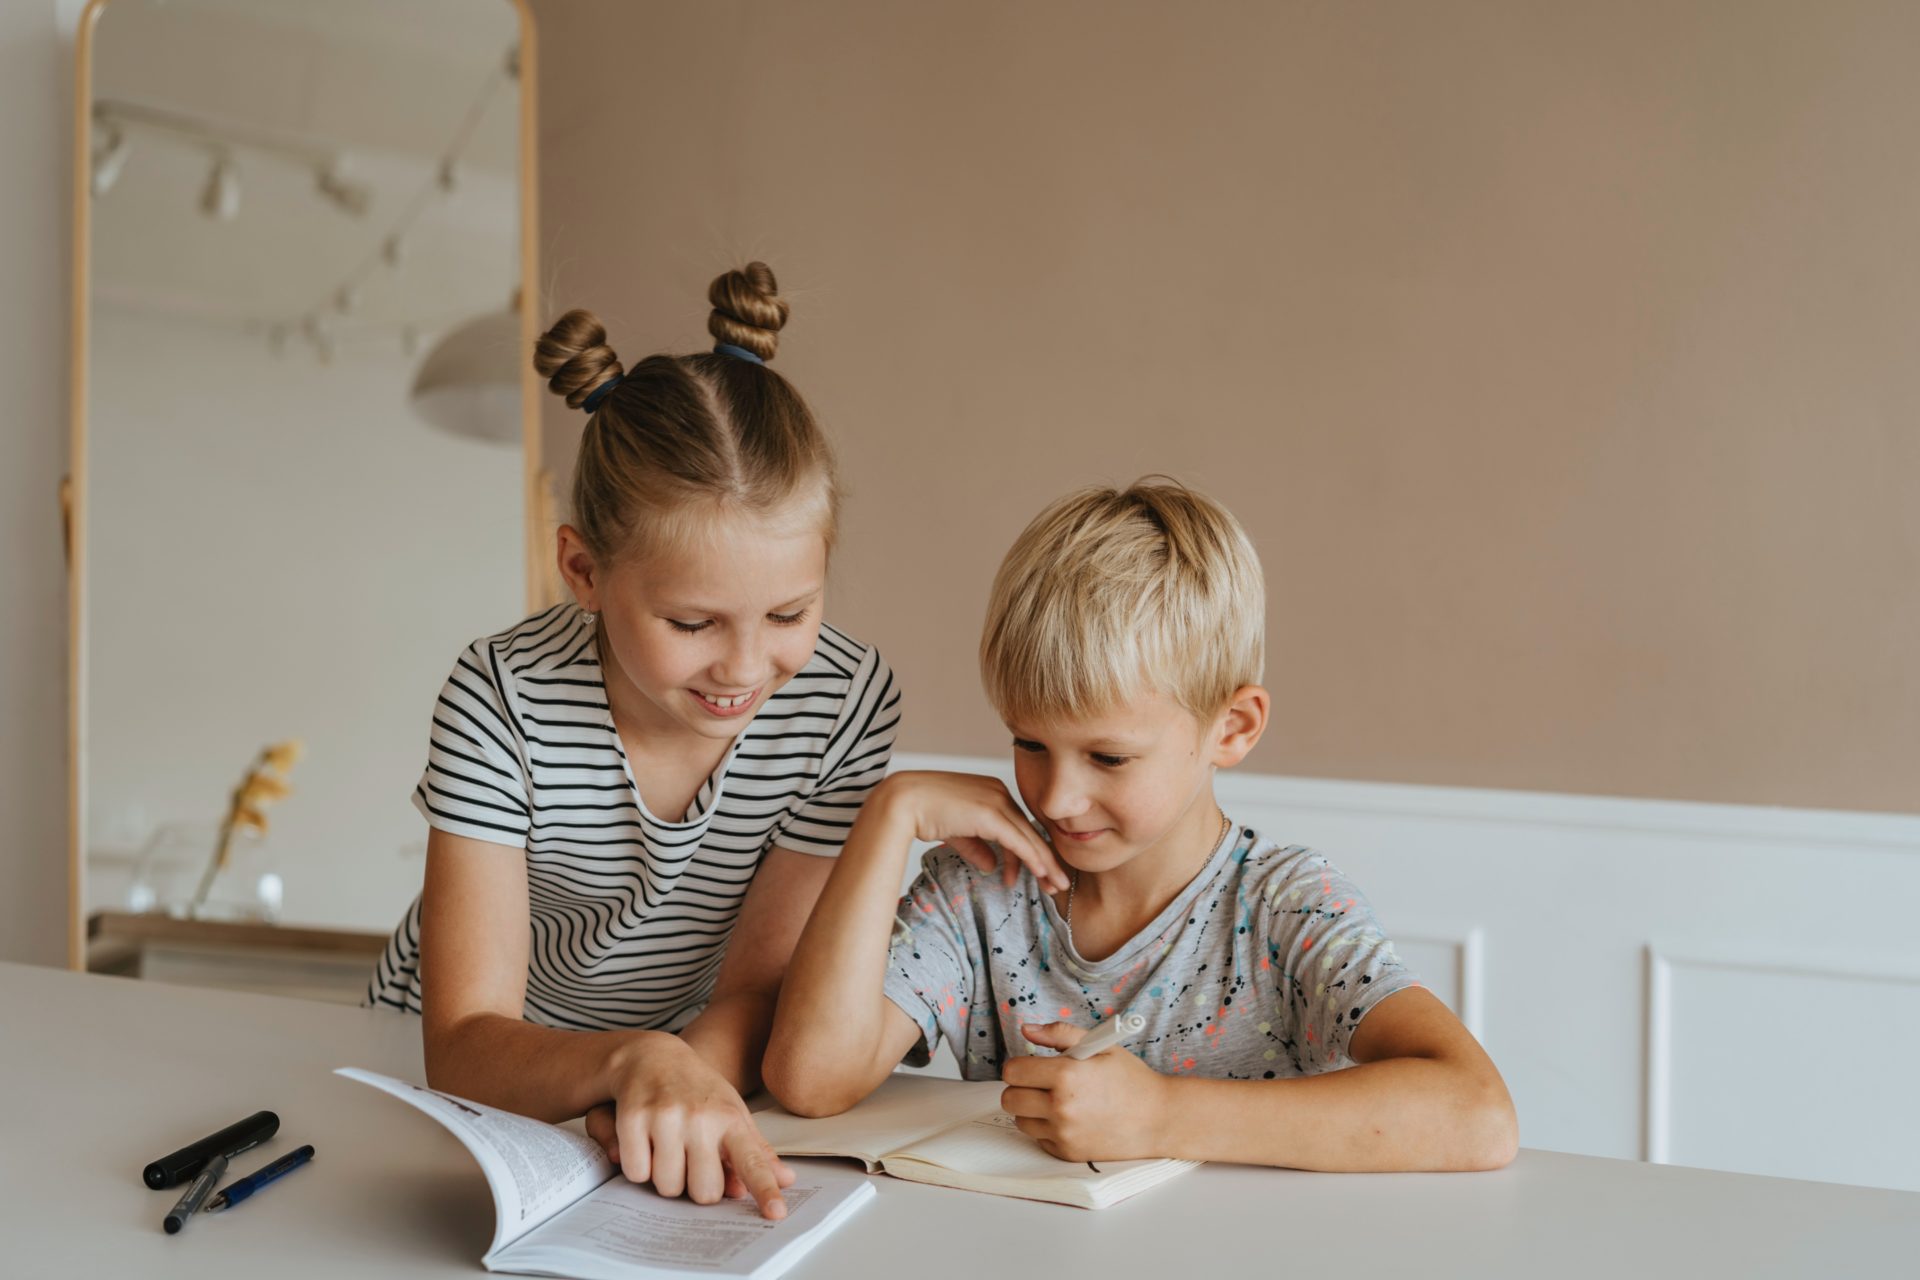 Why wait until a child is 7 years old to assess for Dyslexia? - Theresa Davies Dyslexia Assessments and Tutoring Bishop's Stortford, Herts, Essex, Bedfordshire, Cambridgeshire, Kent, Buckinghamshire, London - Photo by Olia Davilevich on Pexels